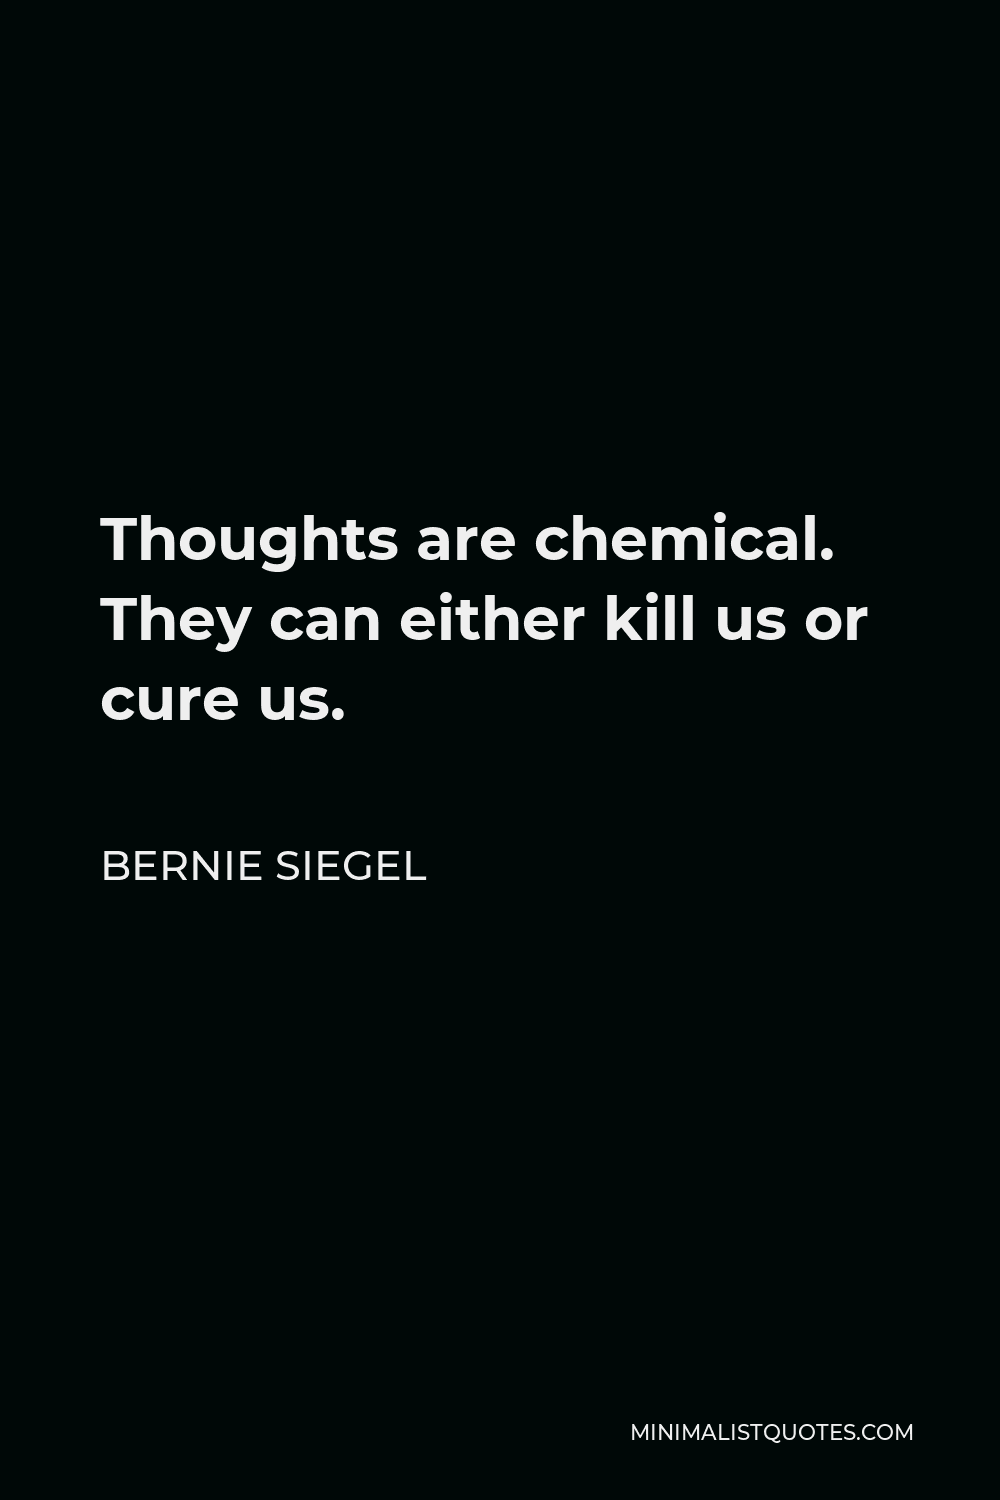 Bernie Siegel Quote - Thoughts are chemical. They can either kill us or cure us.